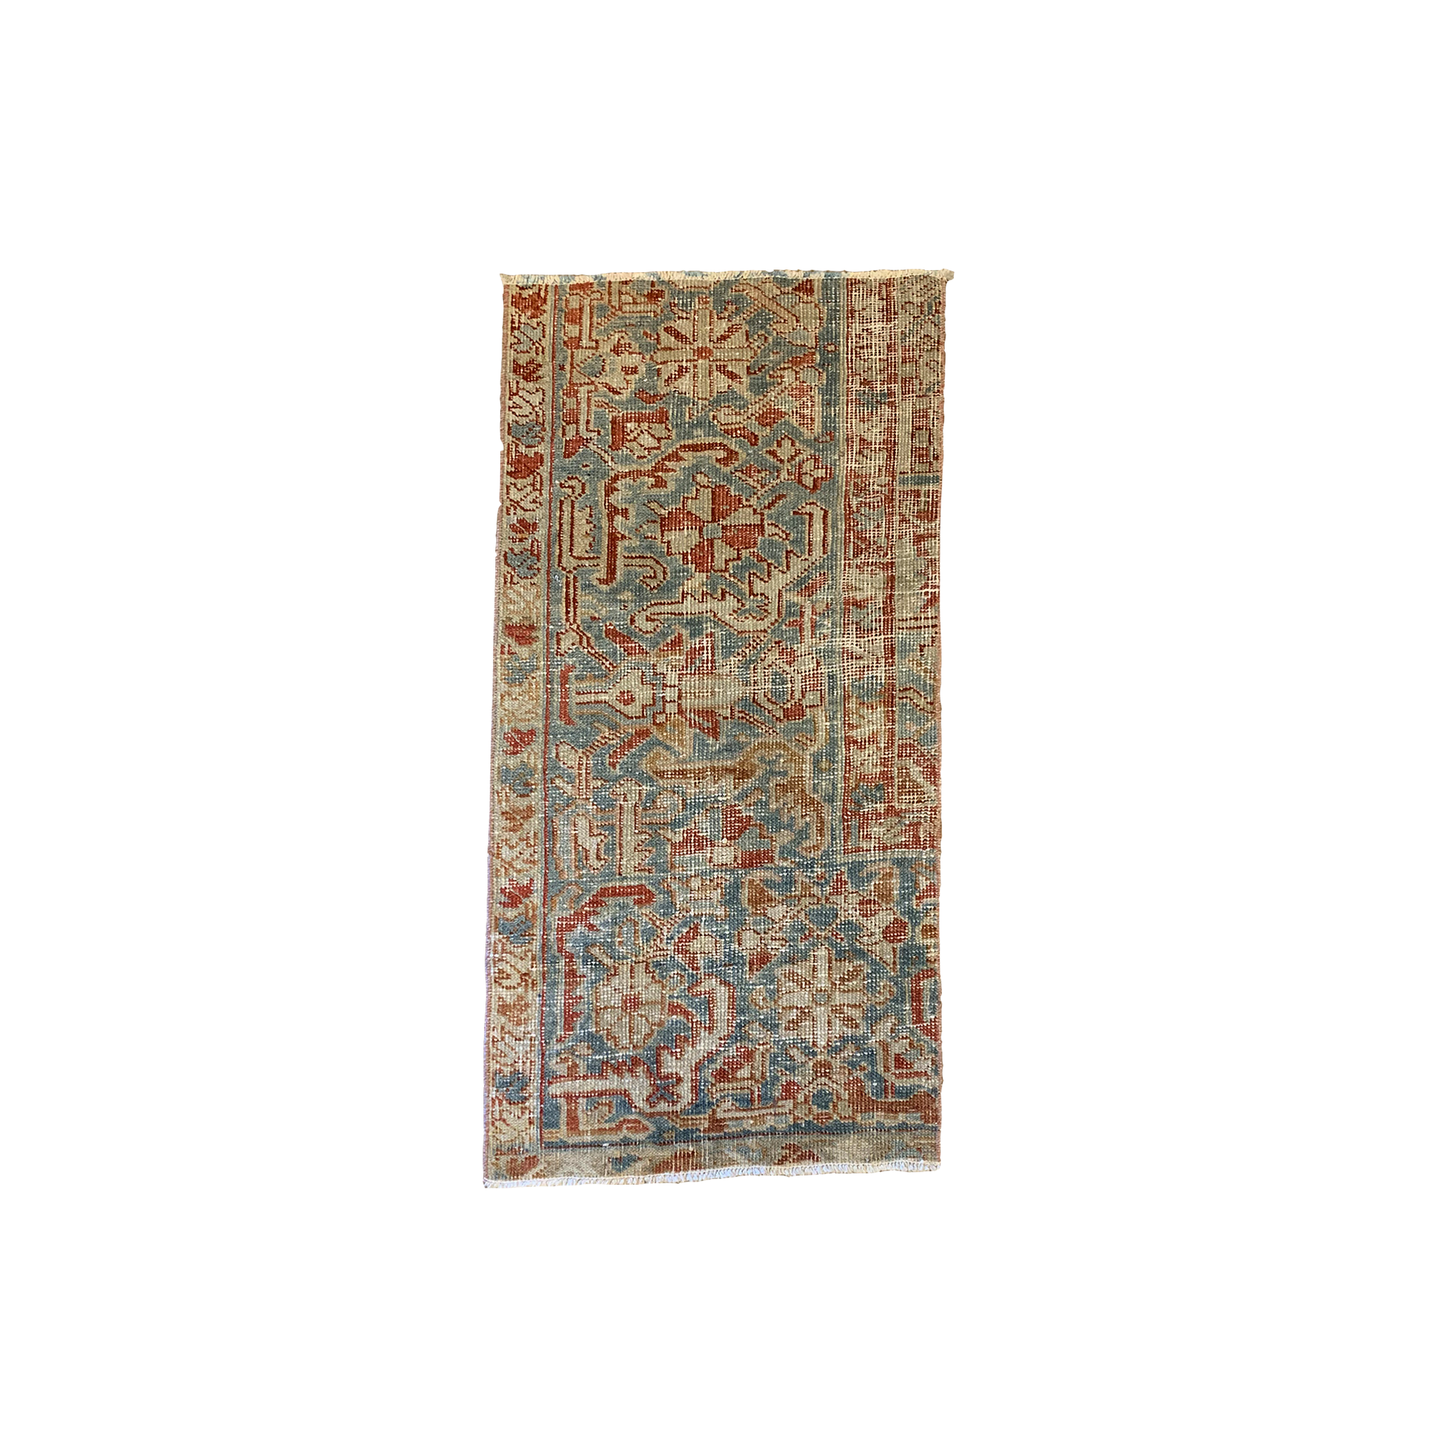 21" X 37" Red, Blue, and Orange Small Vintage Rug